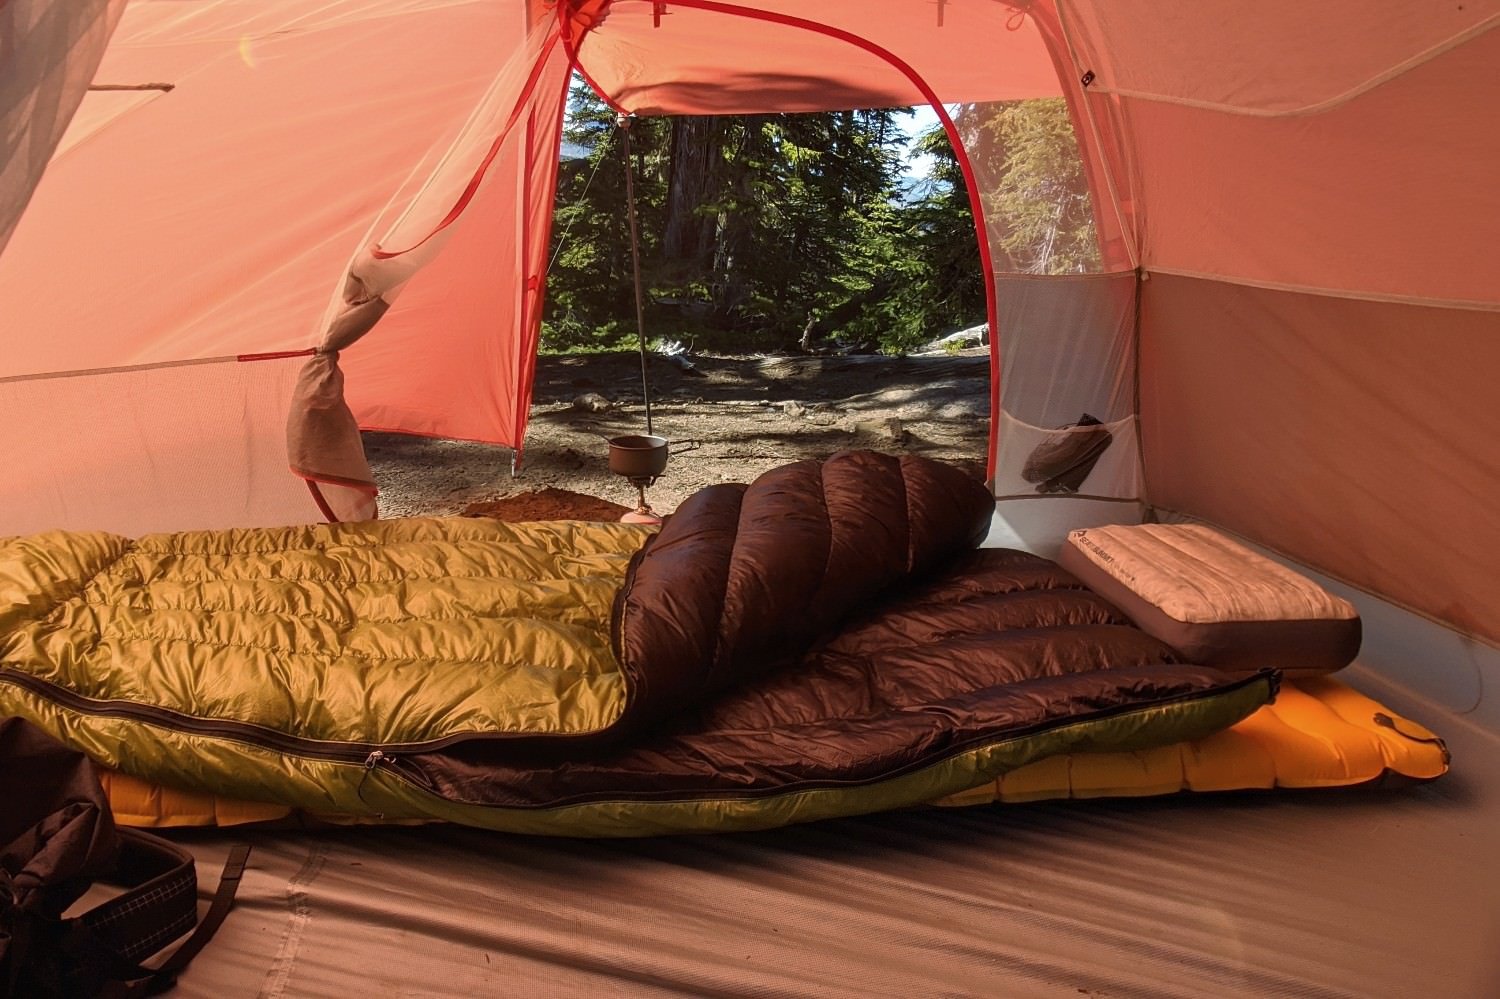 The Zpacks Classic Sleeping Bag sitting open inside a tent